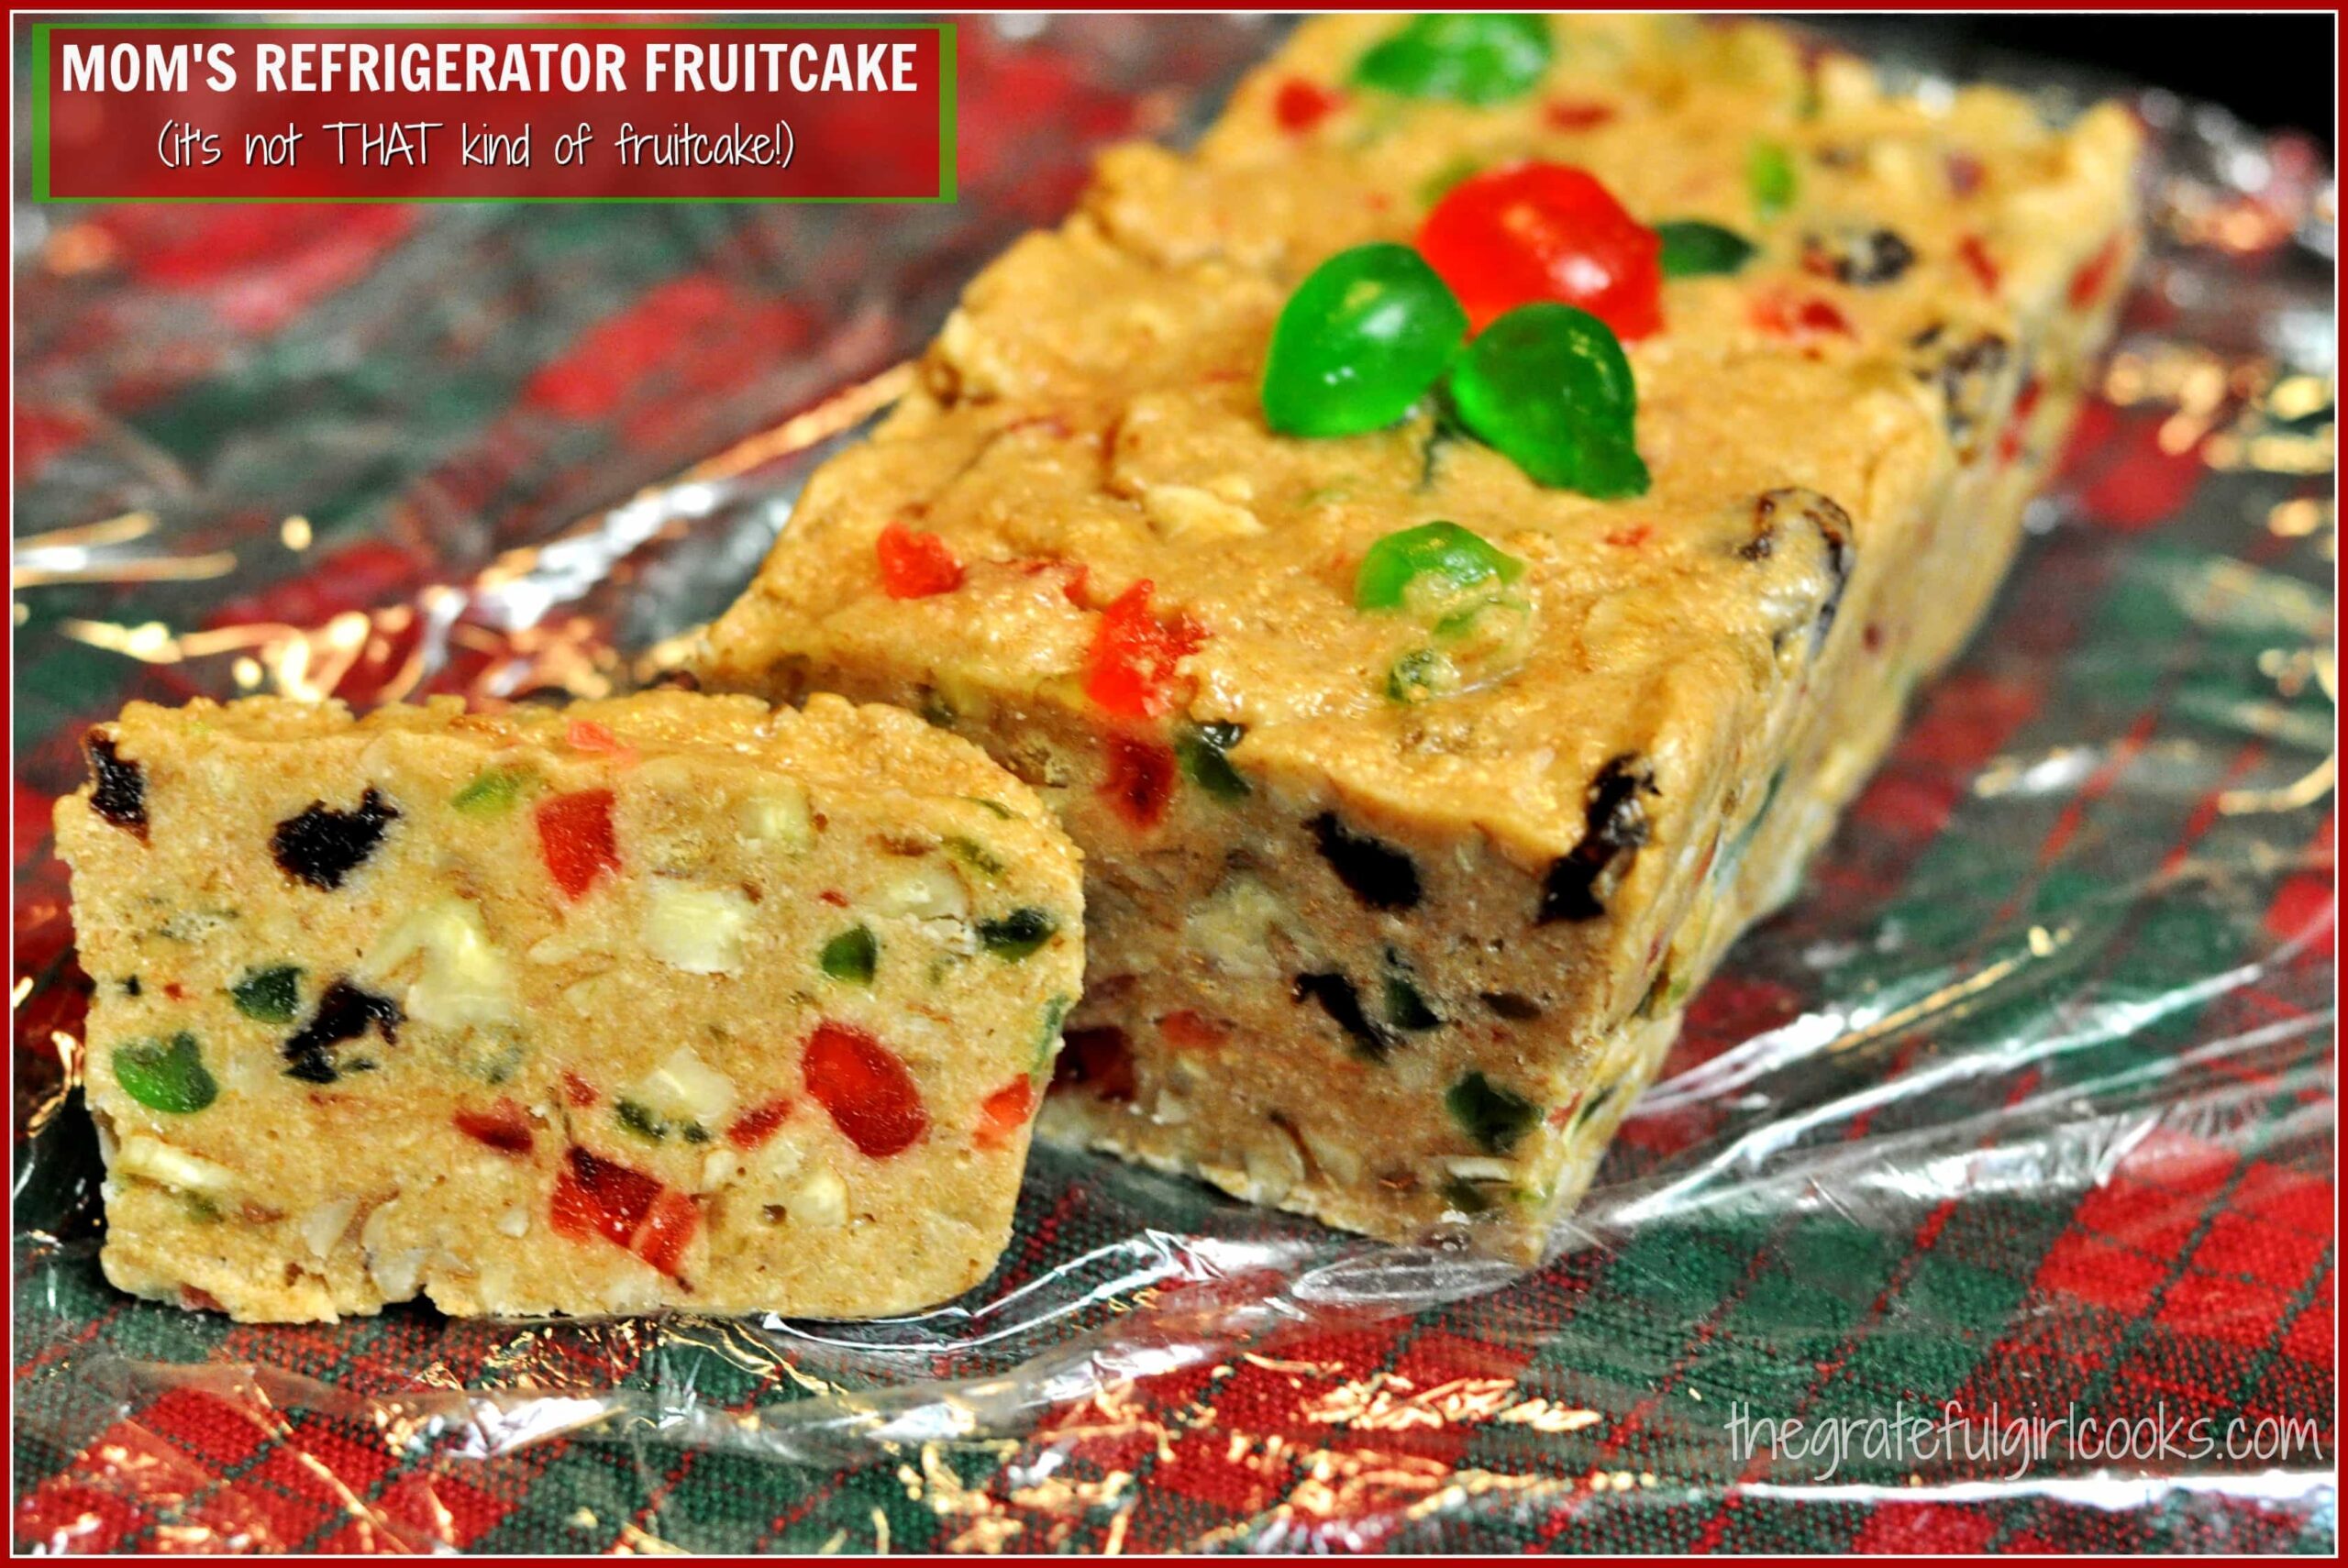 What is the green stuff in fruitcake?